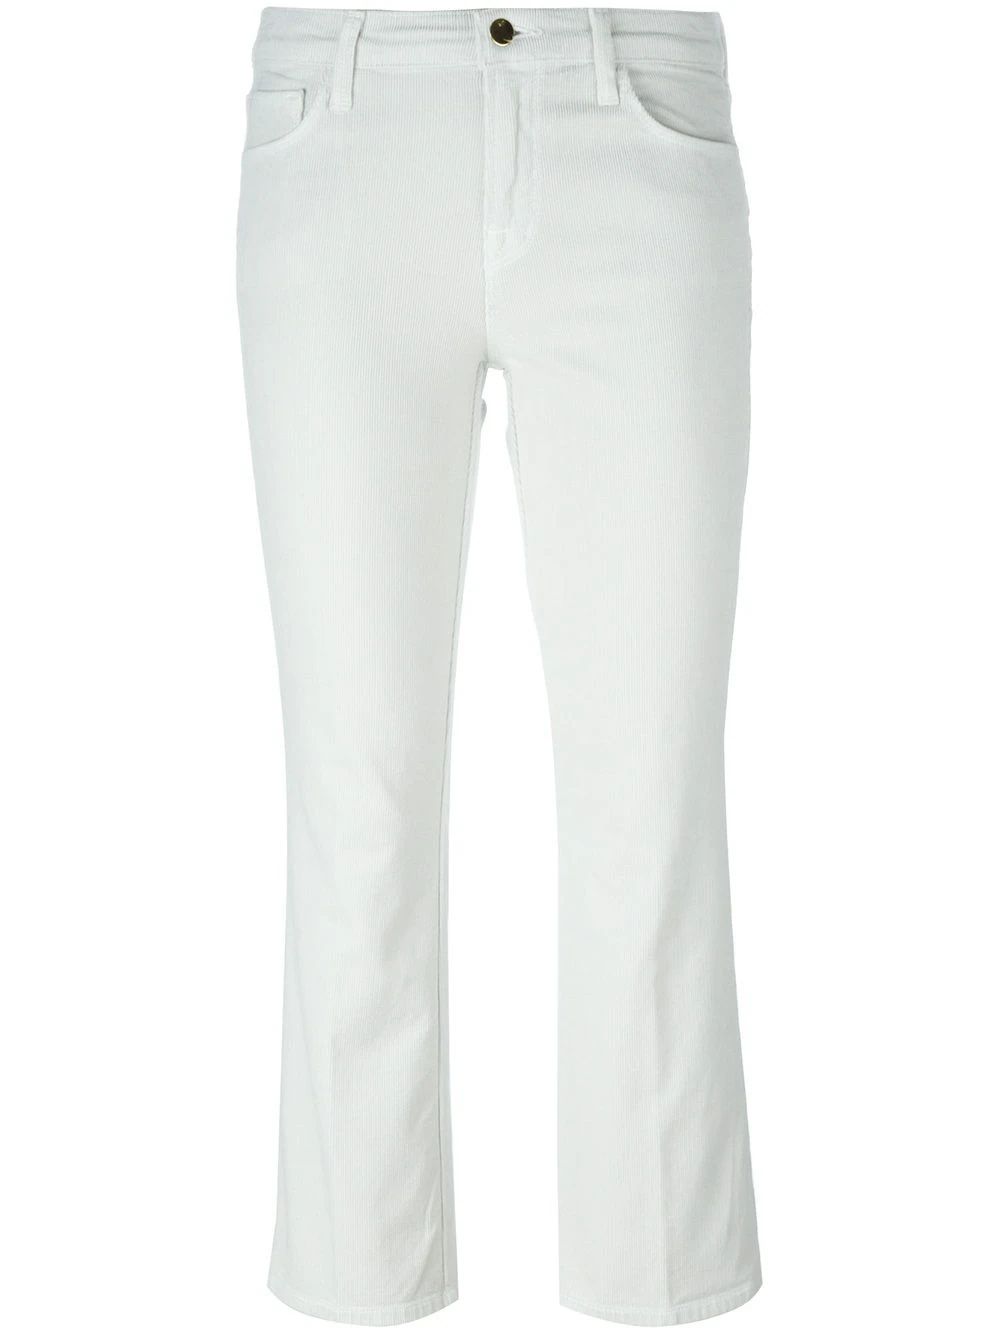 J Brand flared cropped jeans - White | FarFetch US